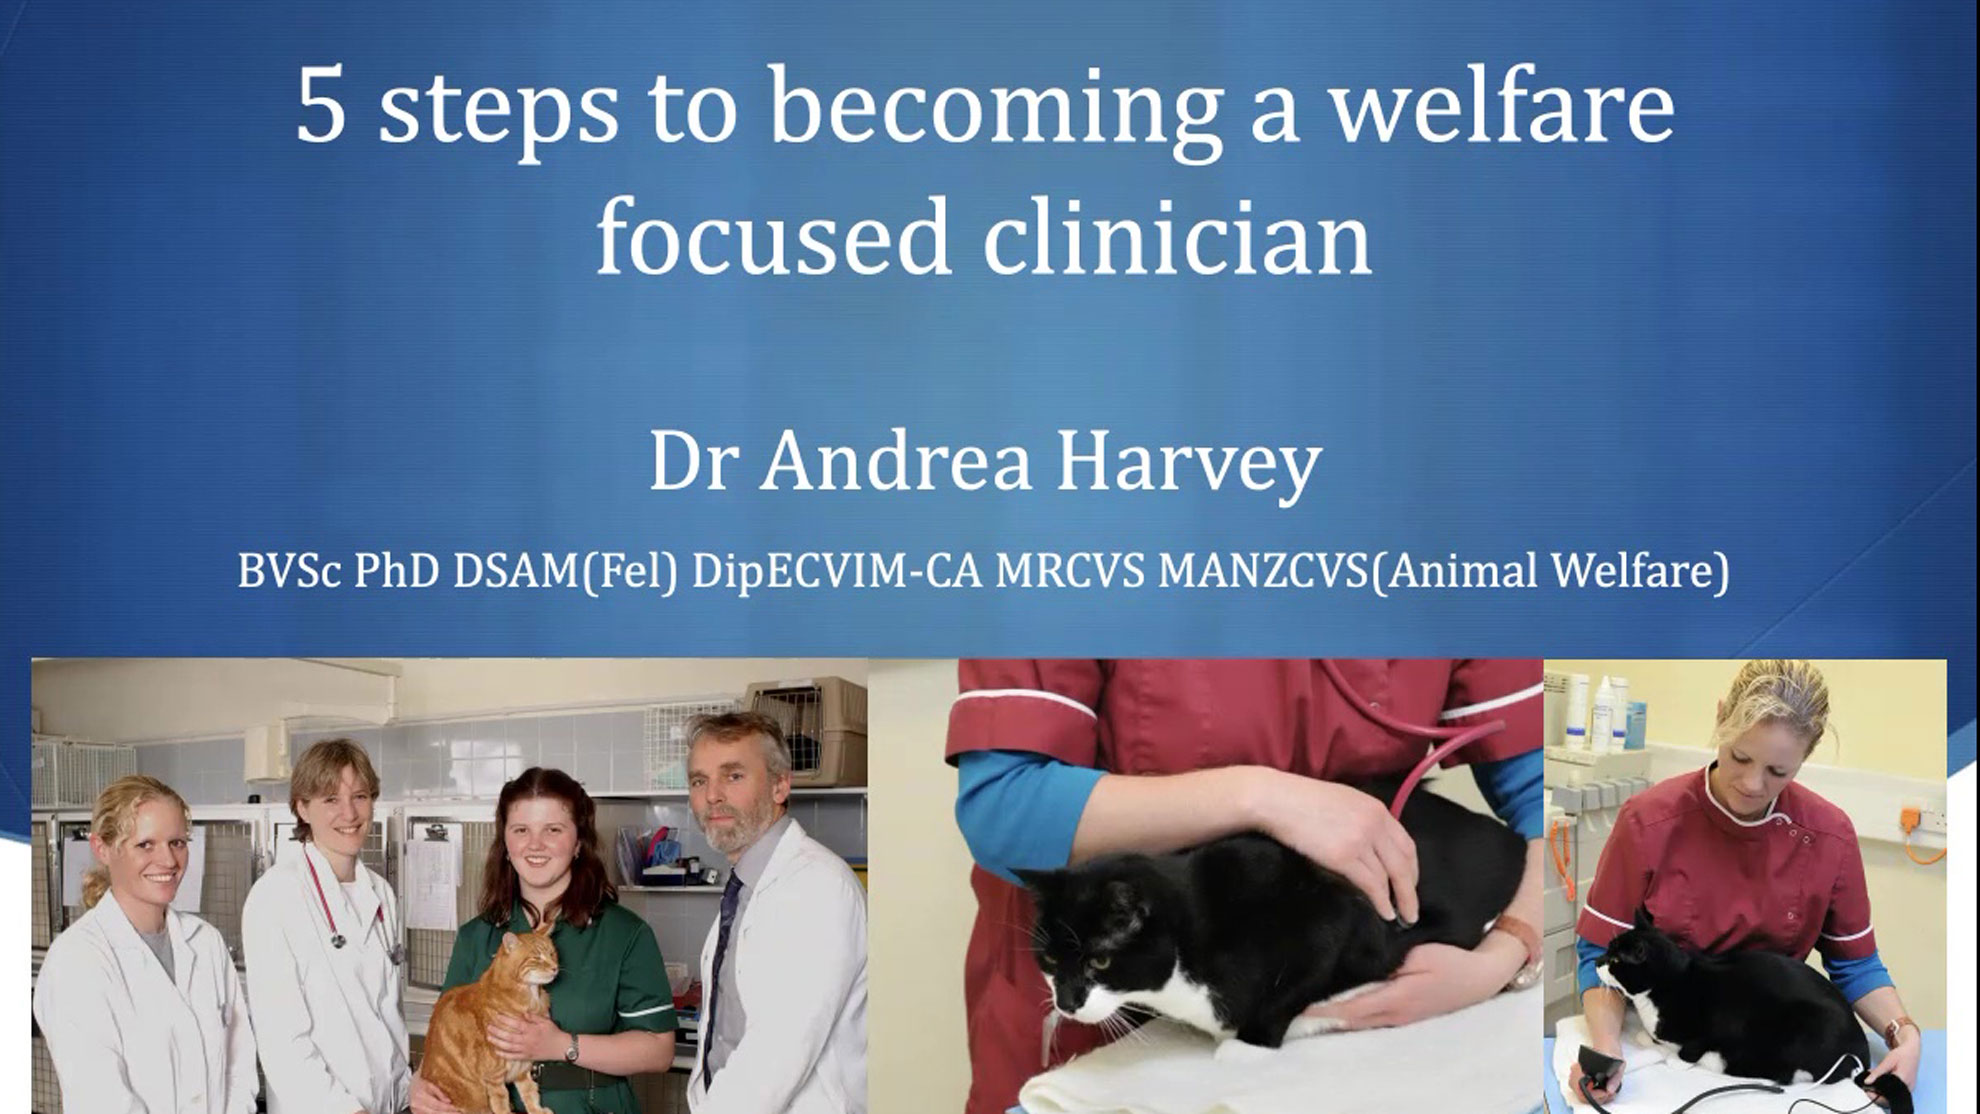 5 Steps to Becoming a Welfare Focused Clinician